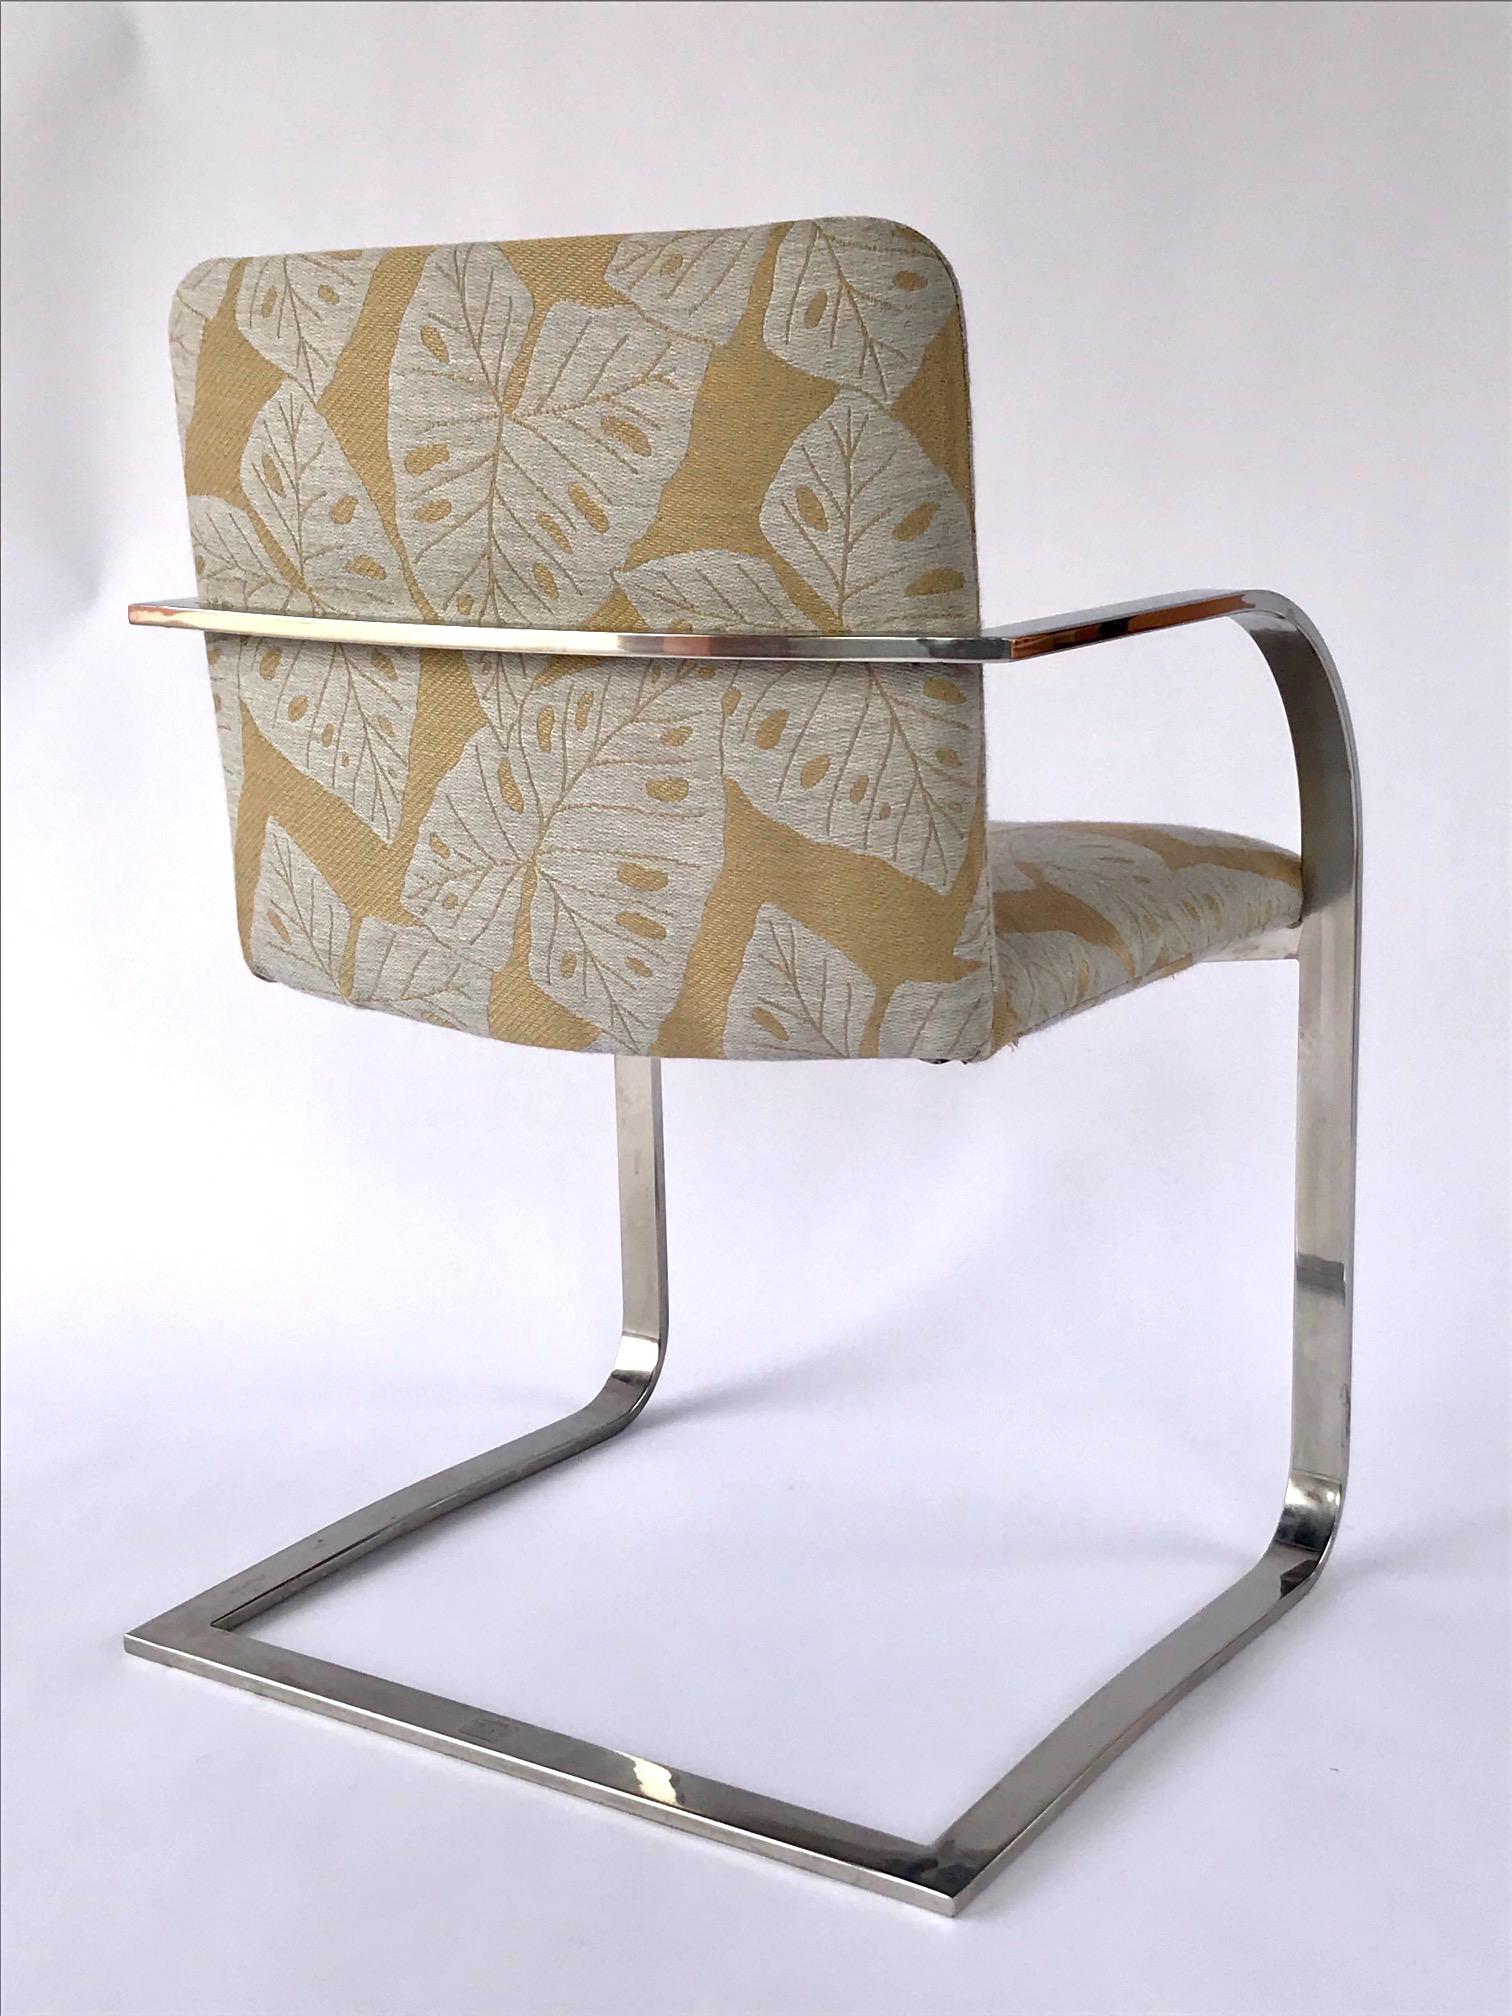 Late 20th Century Mid-Century Modern Chrome Desk Chair with Tropical Print by Brueton